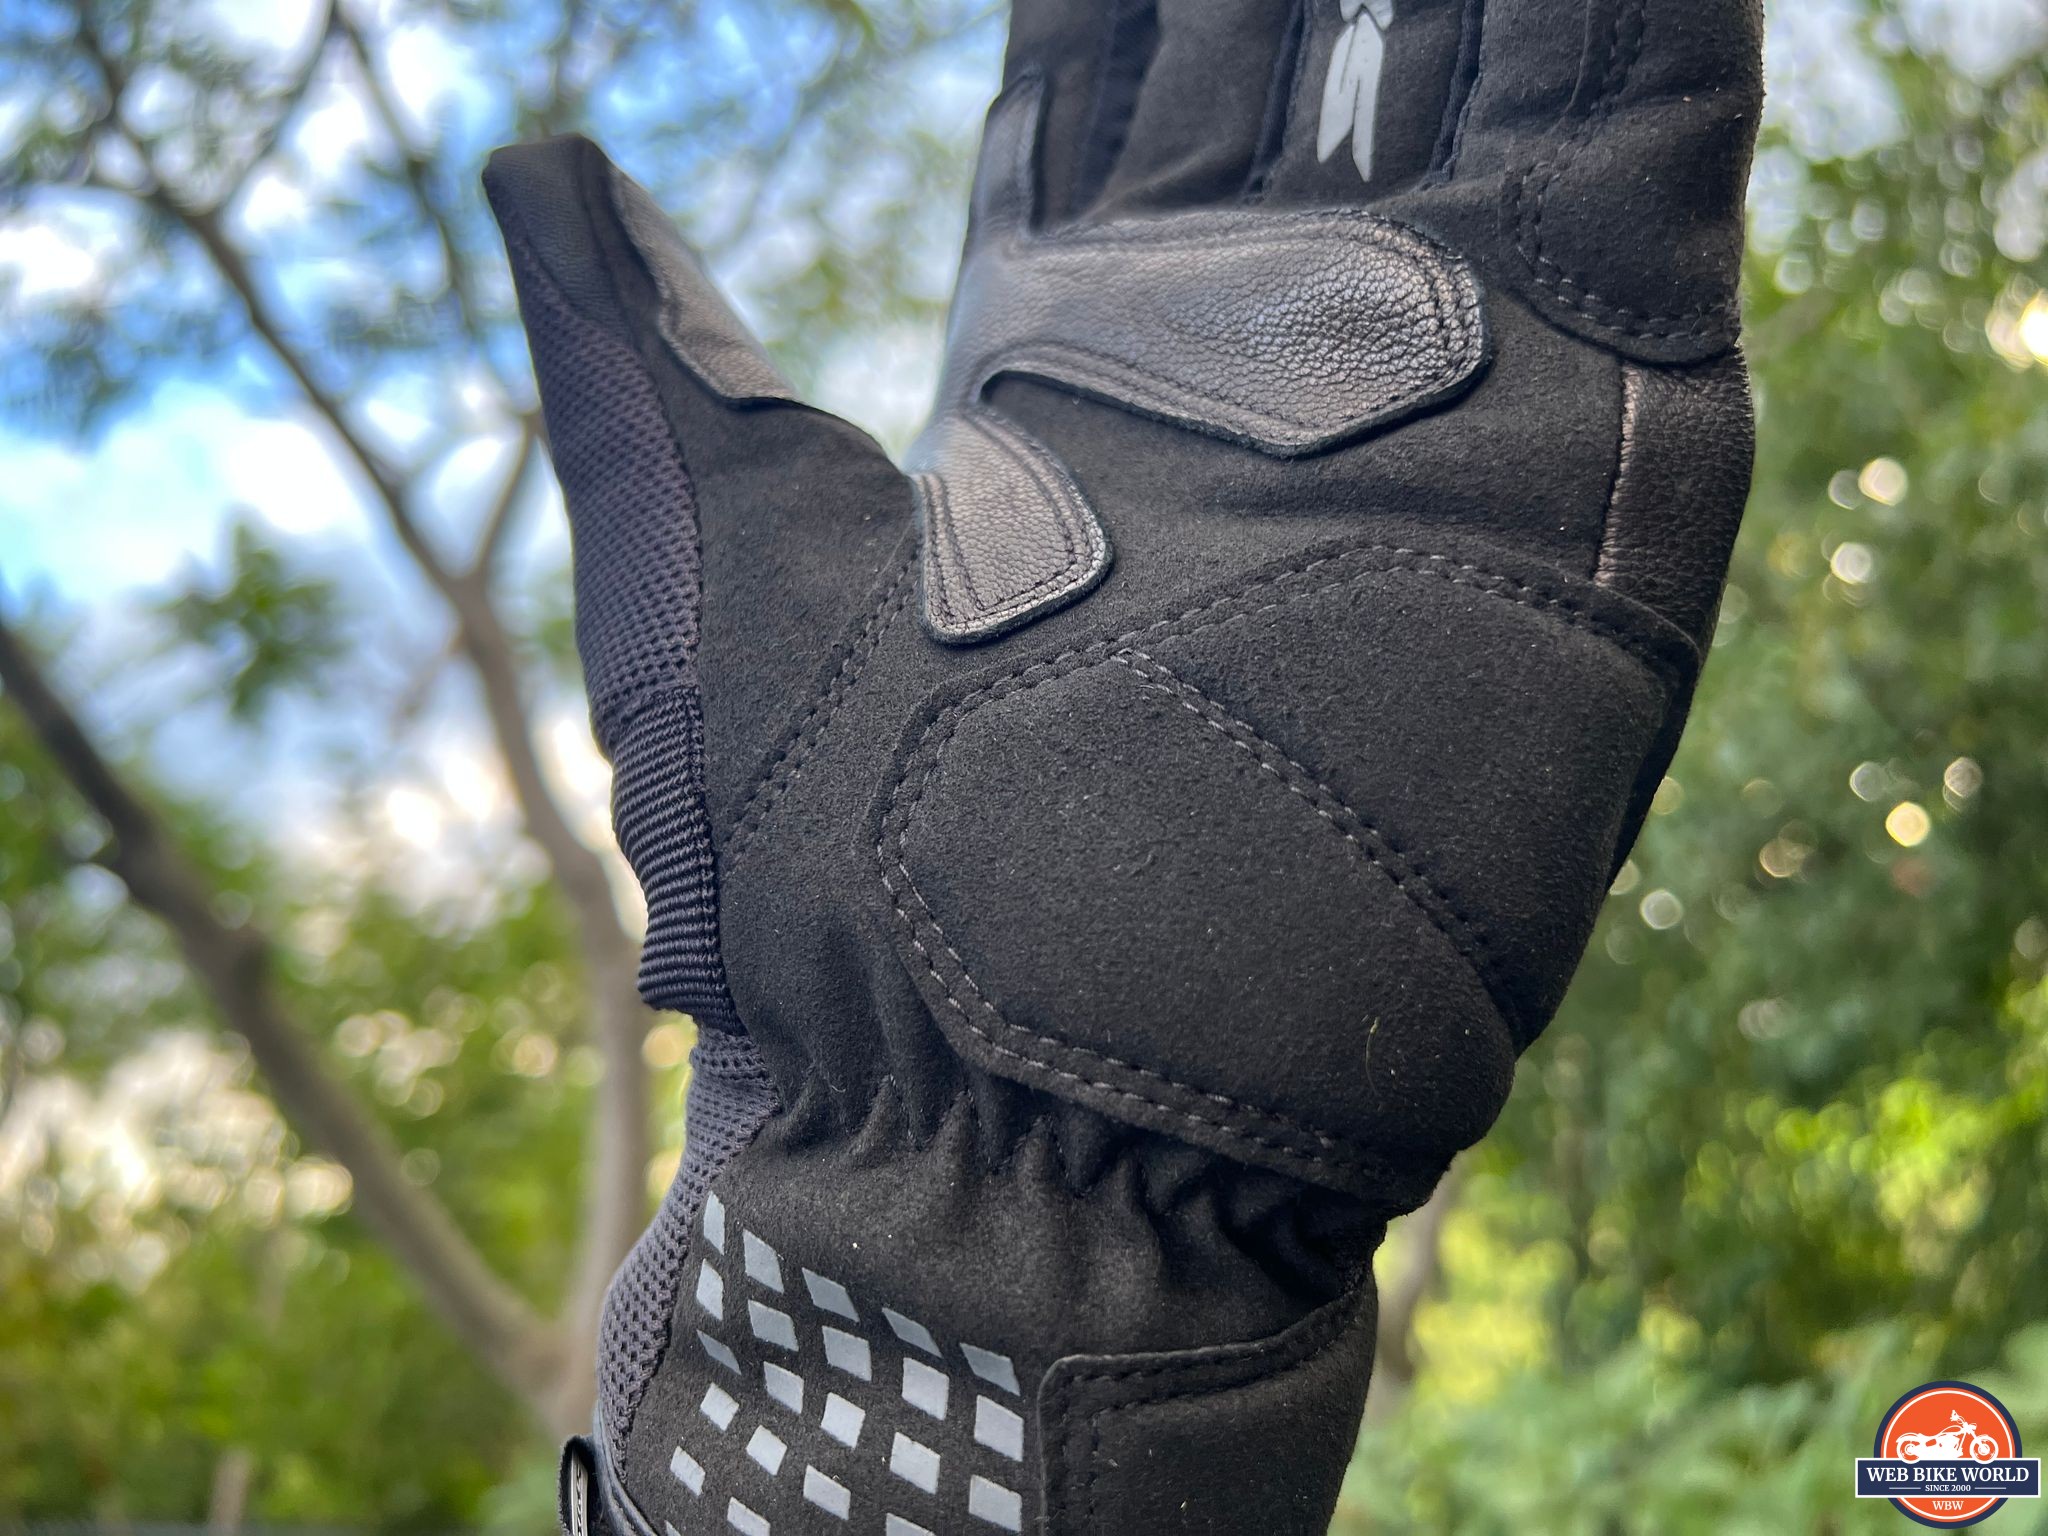 Palm protector of the Spidi Nkd H2Out Gloves